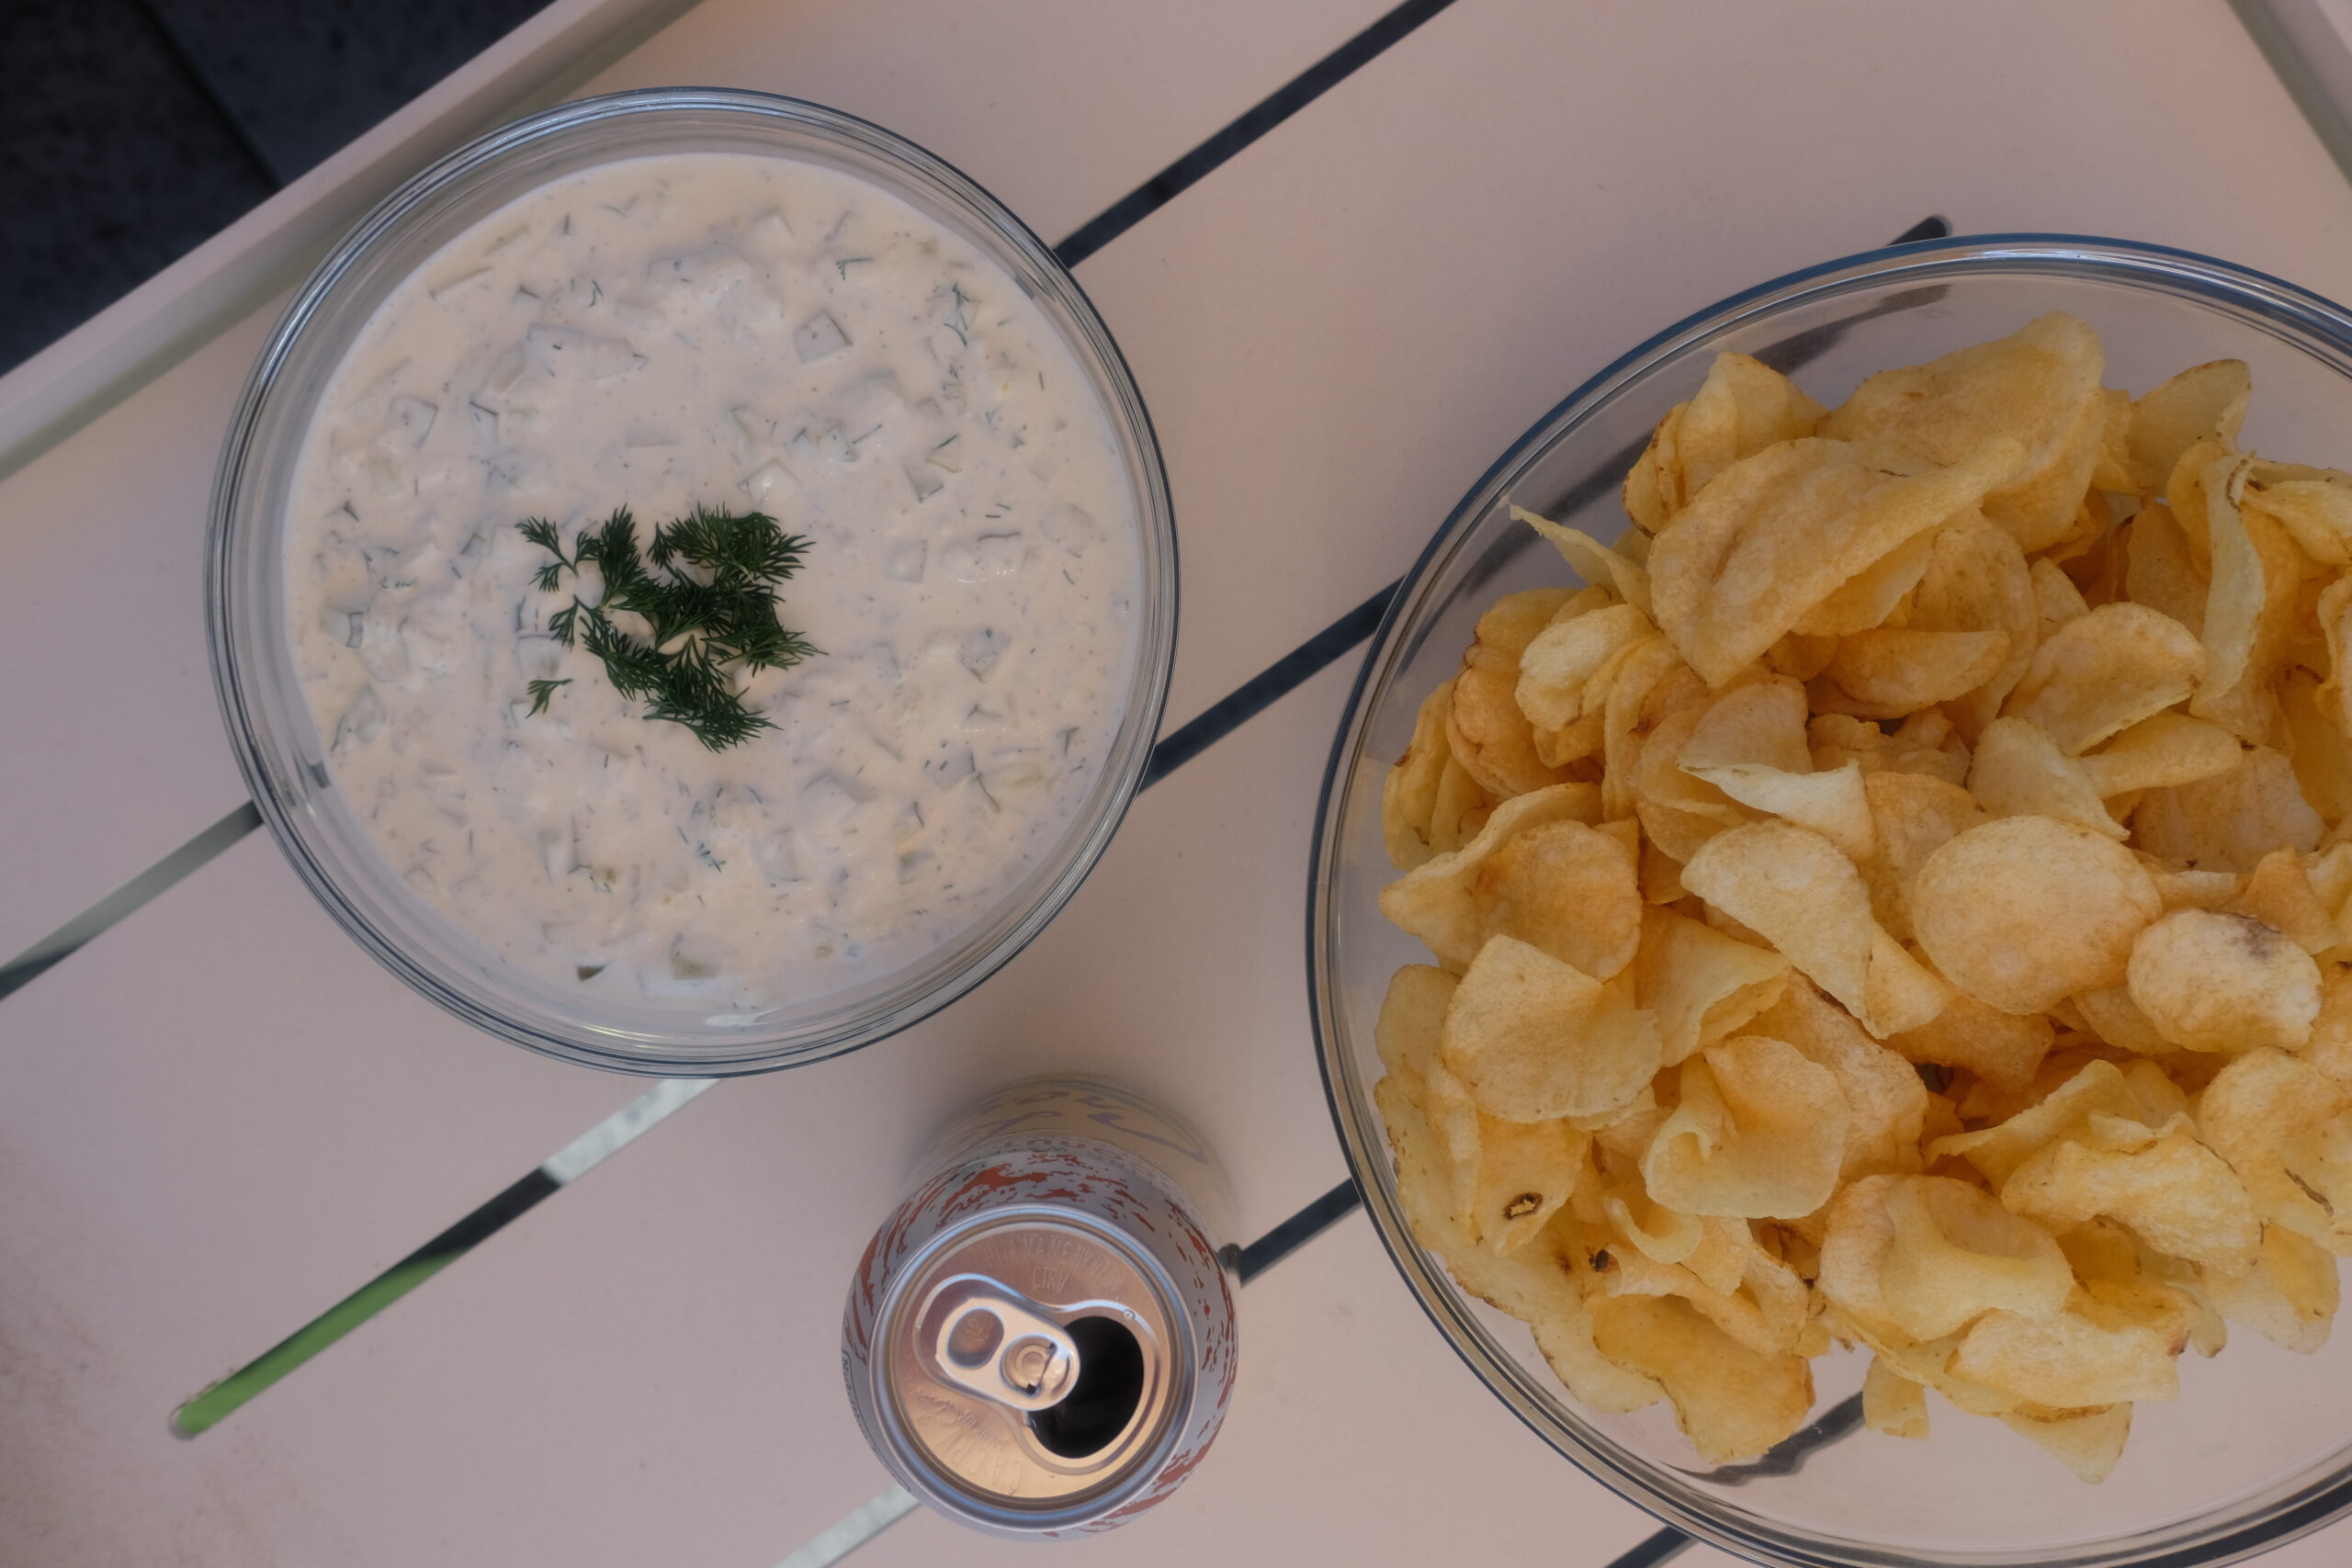 This dip is chunky, briny, tangy and sharp with just the right amount of creaminess to balance out the pickle taste.